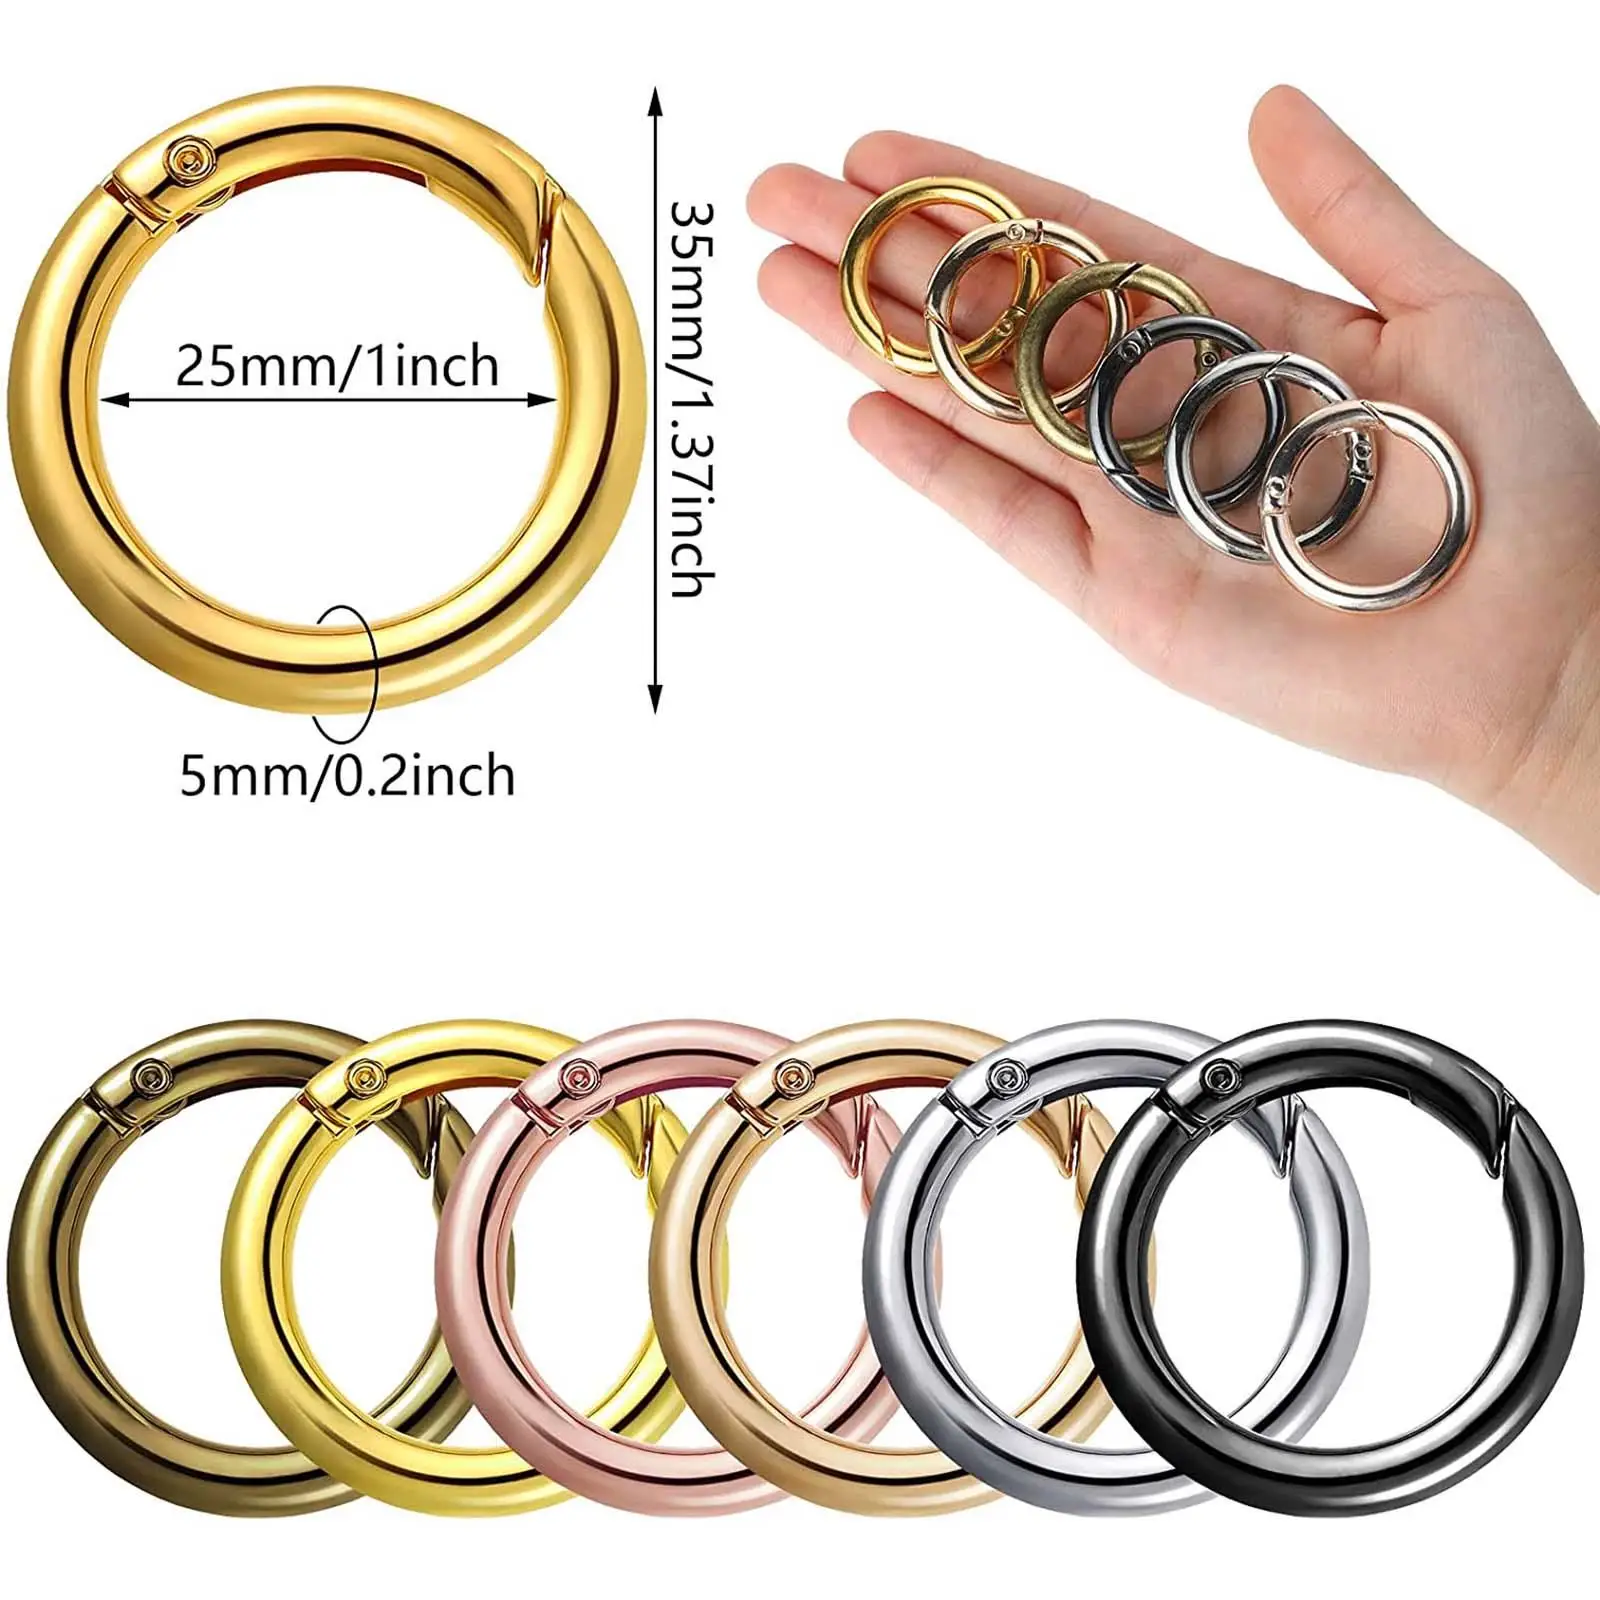 18Pcs Keyring 25MM Openable Metal Spring Gate O Ring Bag Belt Strap Buckle Dog Chain Snap Clasp Clip Luggage